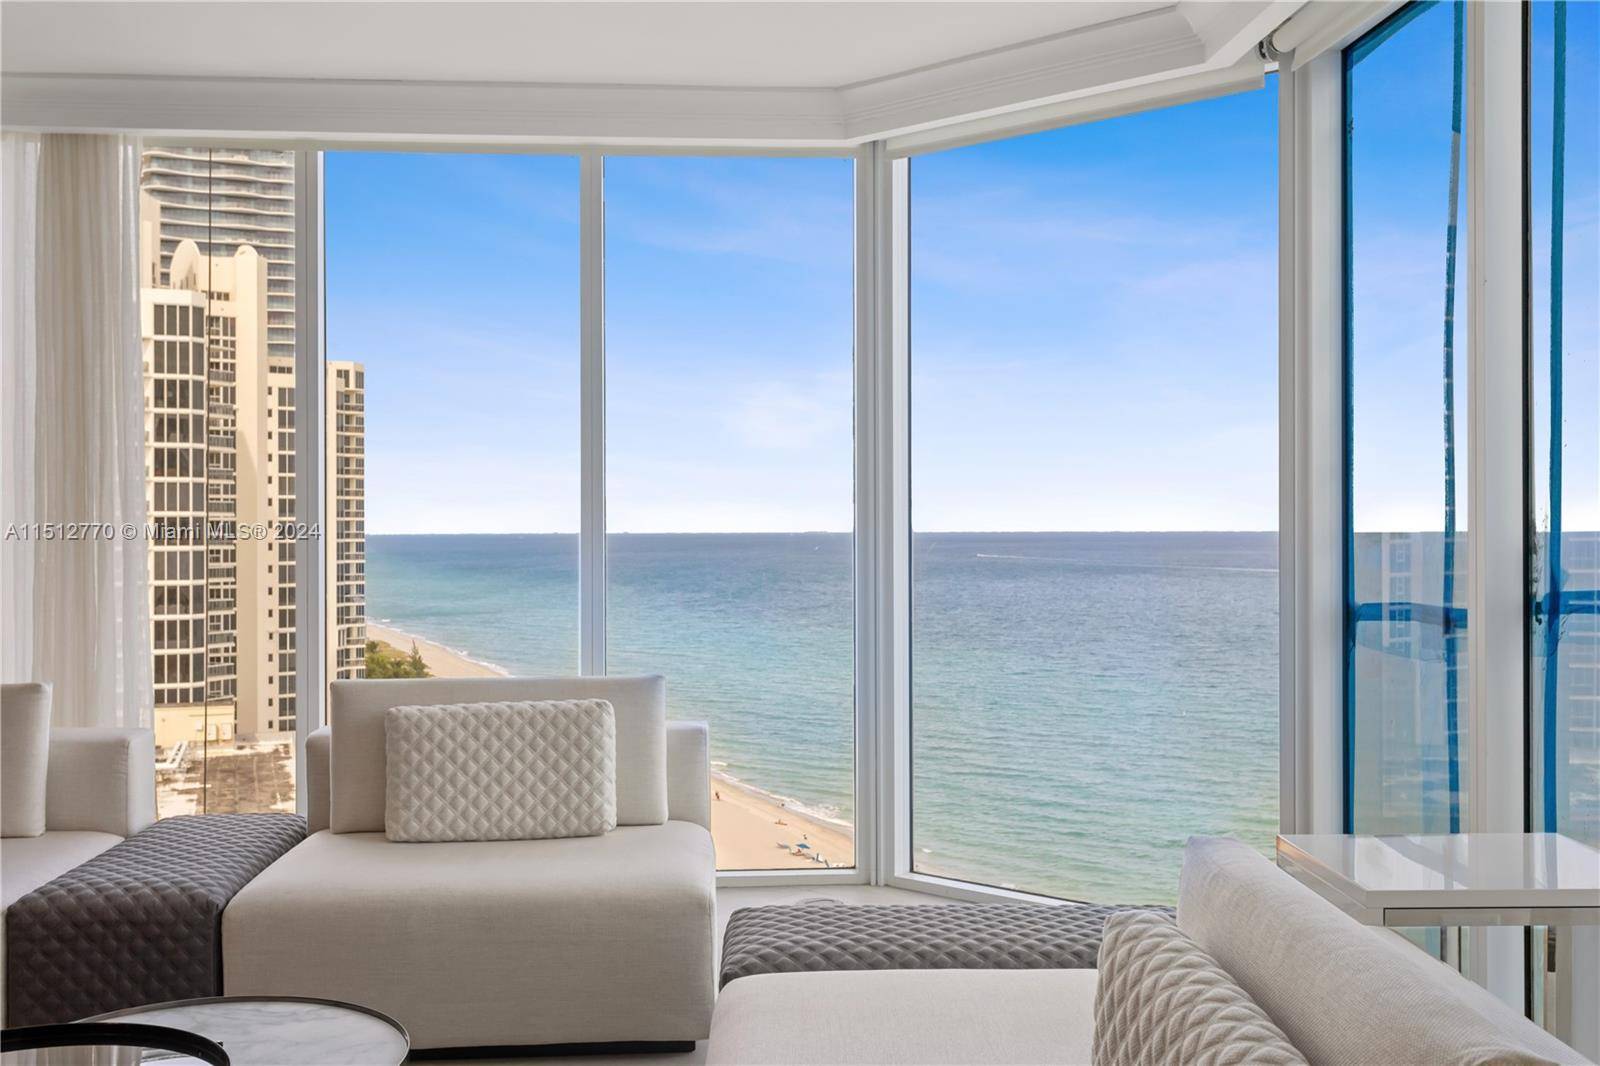 Enjoy the breathtaking simultaneous ocean and intercoastal views from this spectacular luxury unit on the 17thfloor of Ocean Two Condominium.